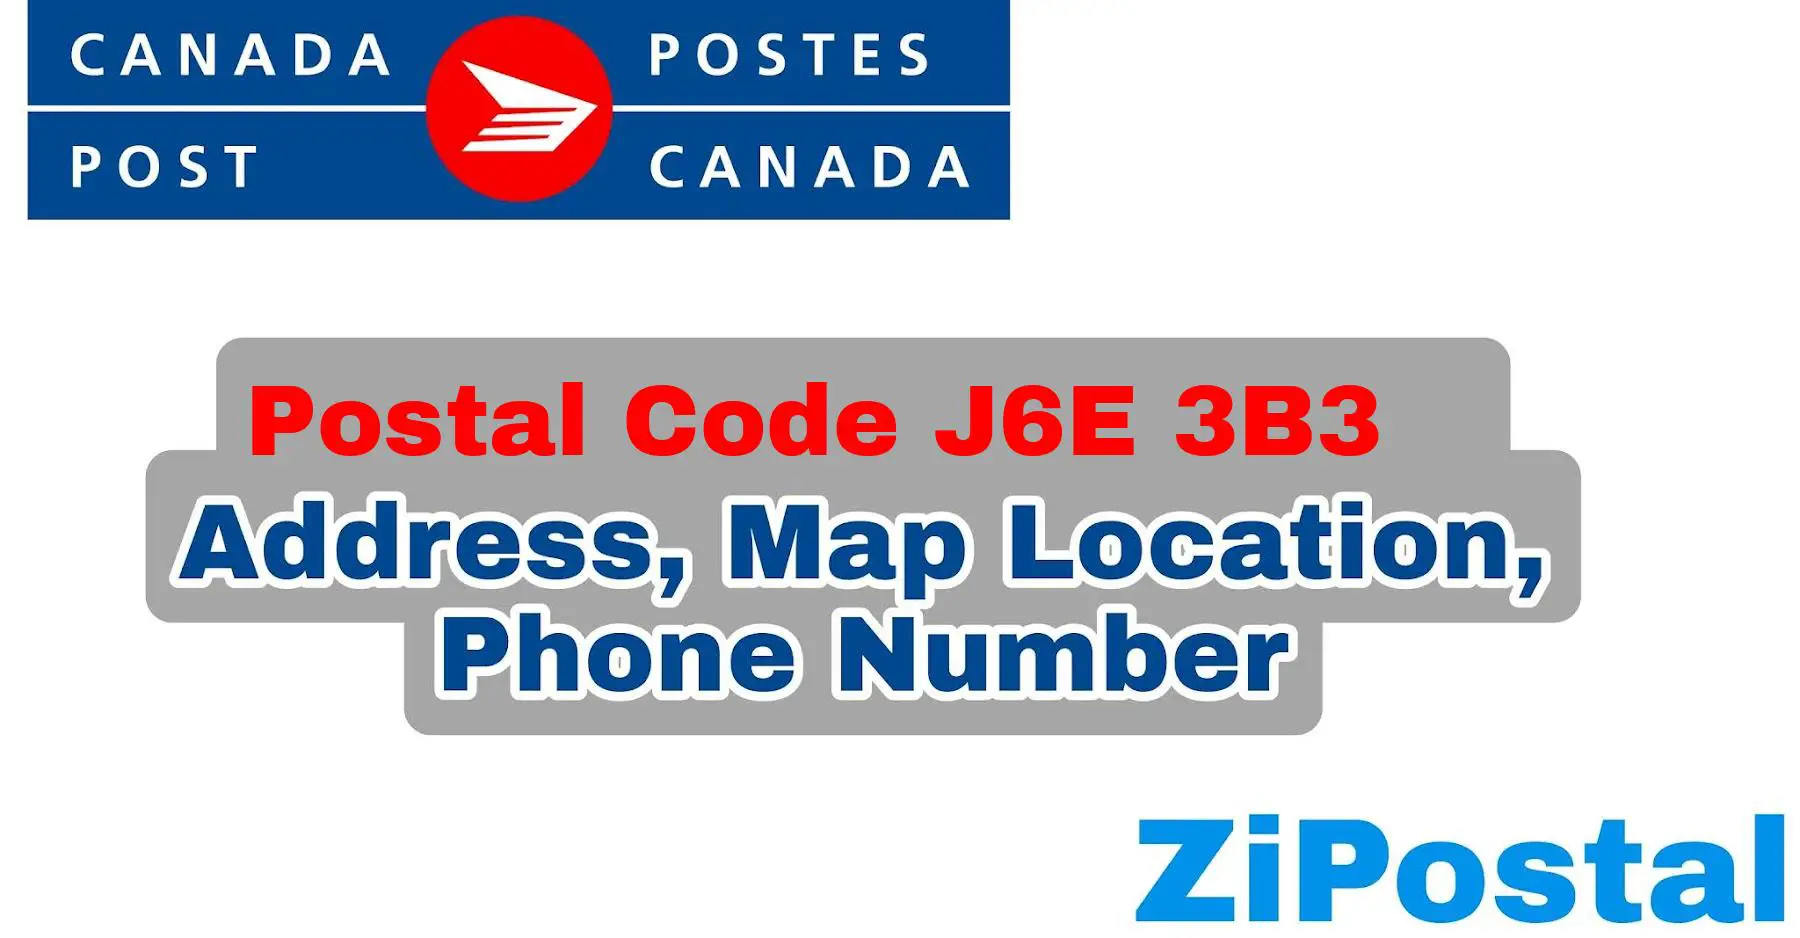 Postal Code J6E 3B3 Address Map Location and Phone Number